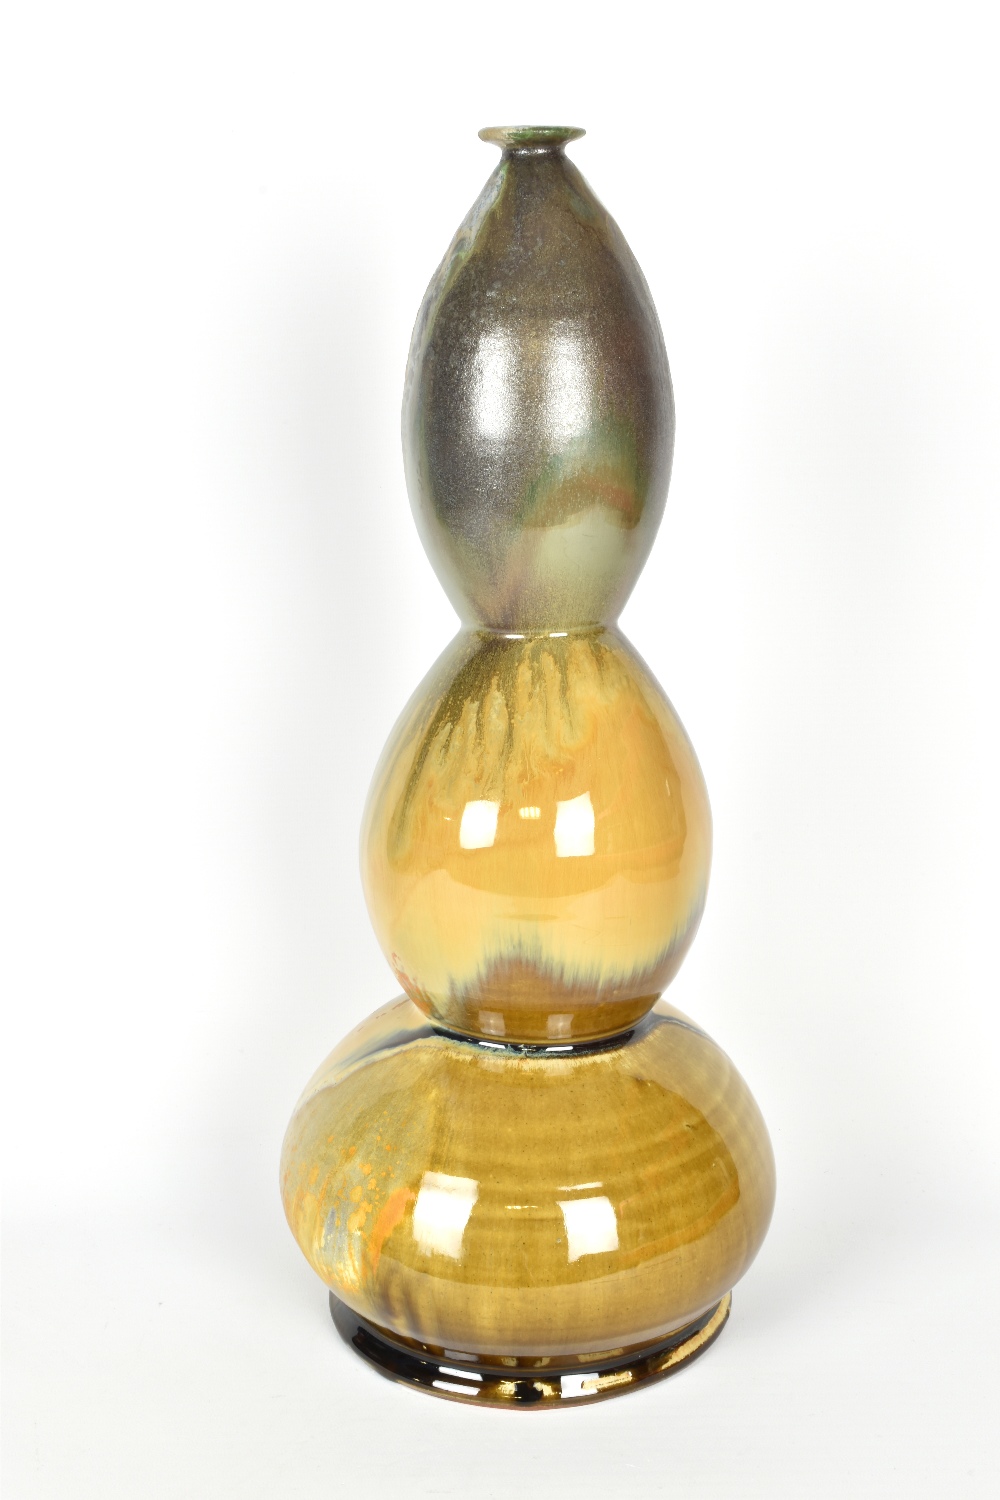 JEFF BROWN: a wood fired stoneware stacked bottle covered in streaky glaze, height 46cm. Brown is